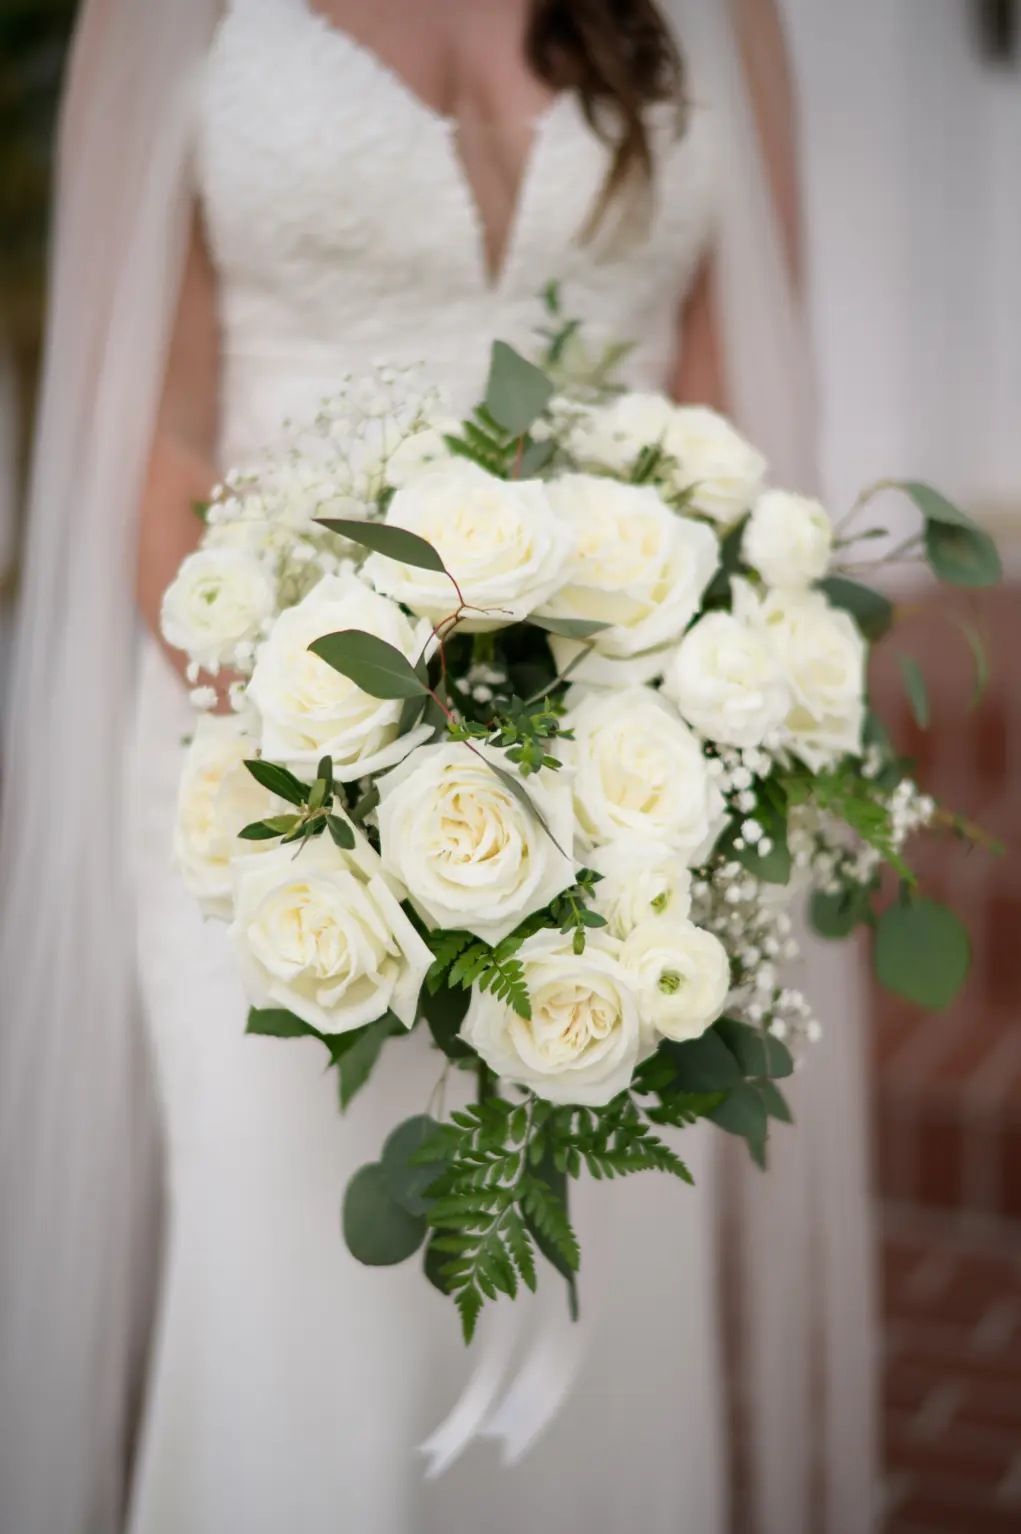 Classic White Roses, Baby's Breath, Anemone, and Greenery Bridal Wedding Bouquet Inspiration